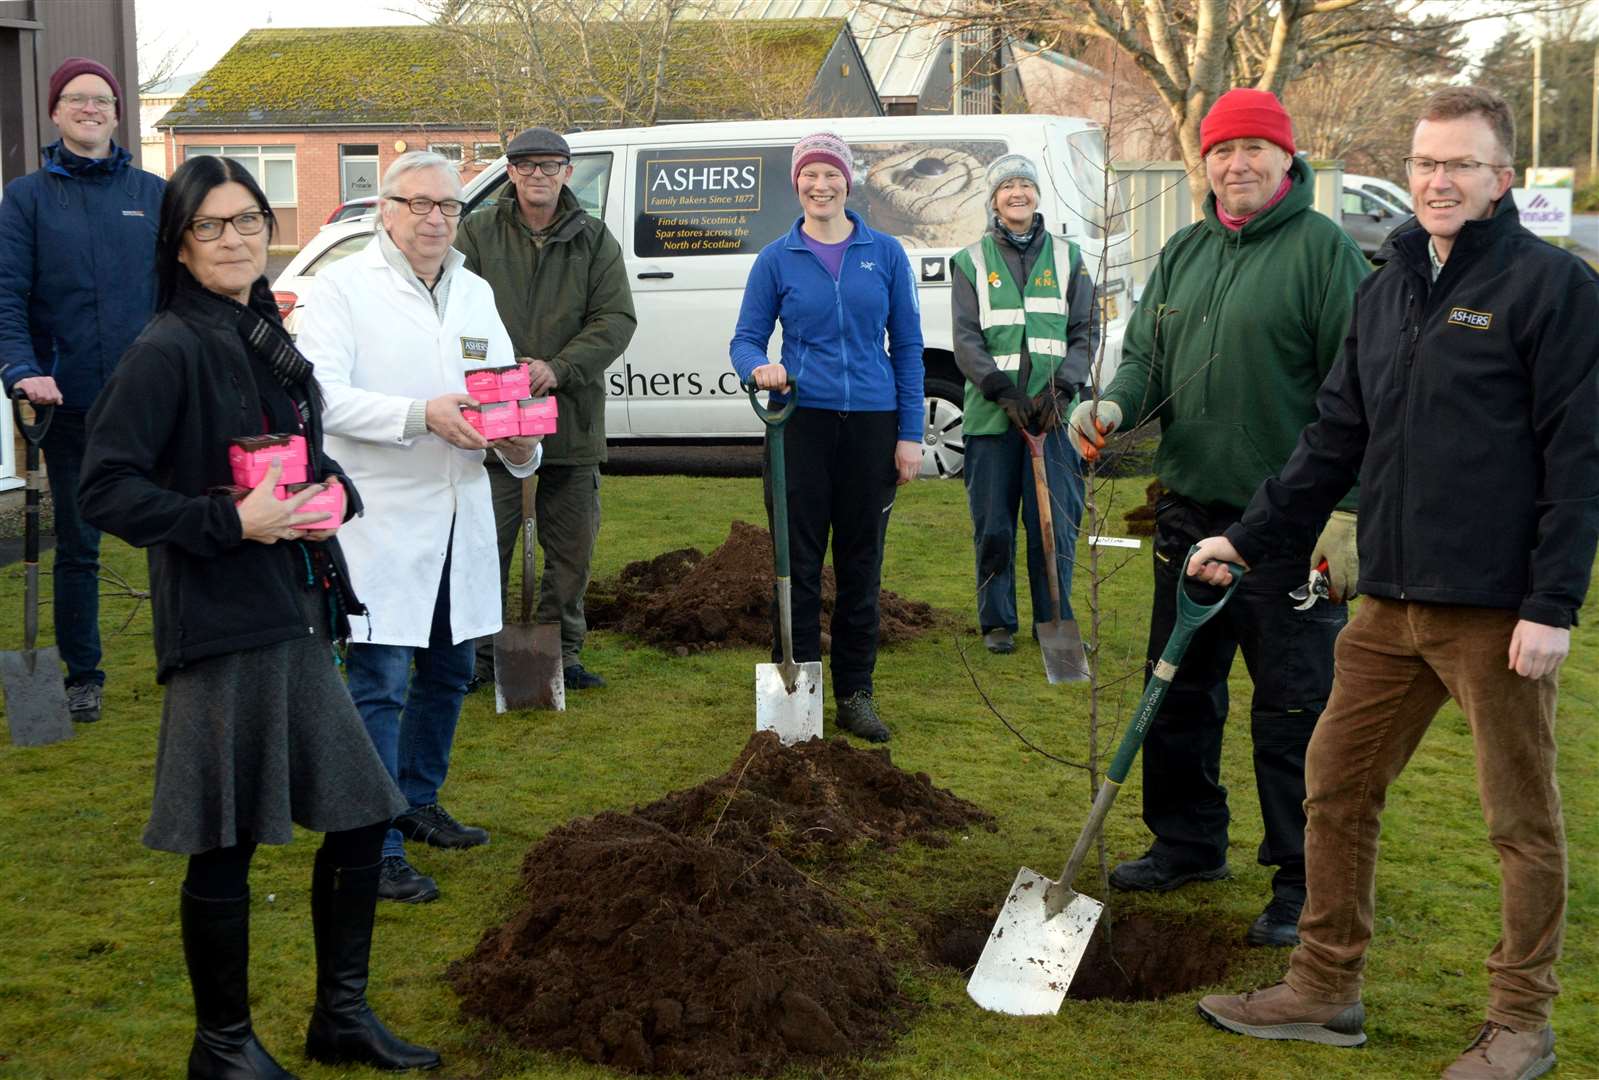 Ashers bakers take up an offer from Des Scholes to plant some apple trees in their ground at Balmakeith: Alex Williamson, volunteer, Avril Good, Ashers Office Admin, Stephen Keenan, Technical Manager, Robert Cunningham, Orchard Group, Cath Raitt, volunteer, Annie Stewart, Keeping Nairnshire Colourful, Des Scholes, Nairn Allotments Orchard Group and George Asher, Ashers Director. Picture: James Mackenzie.